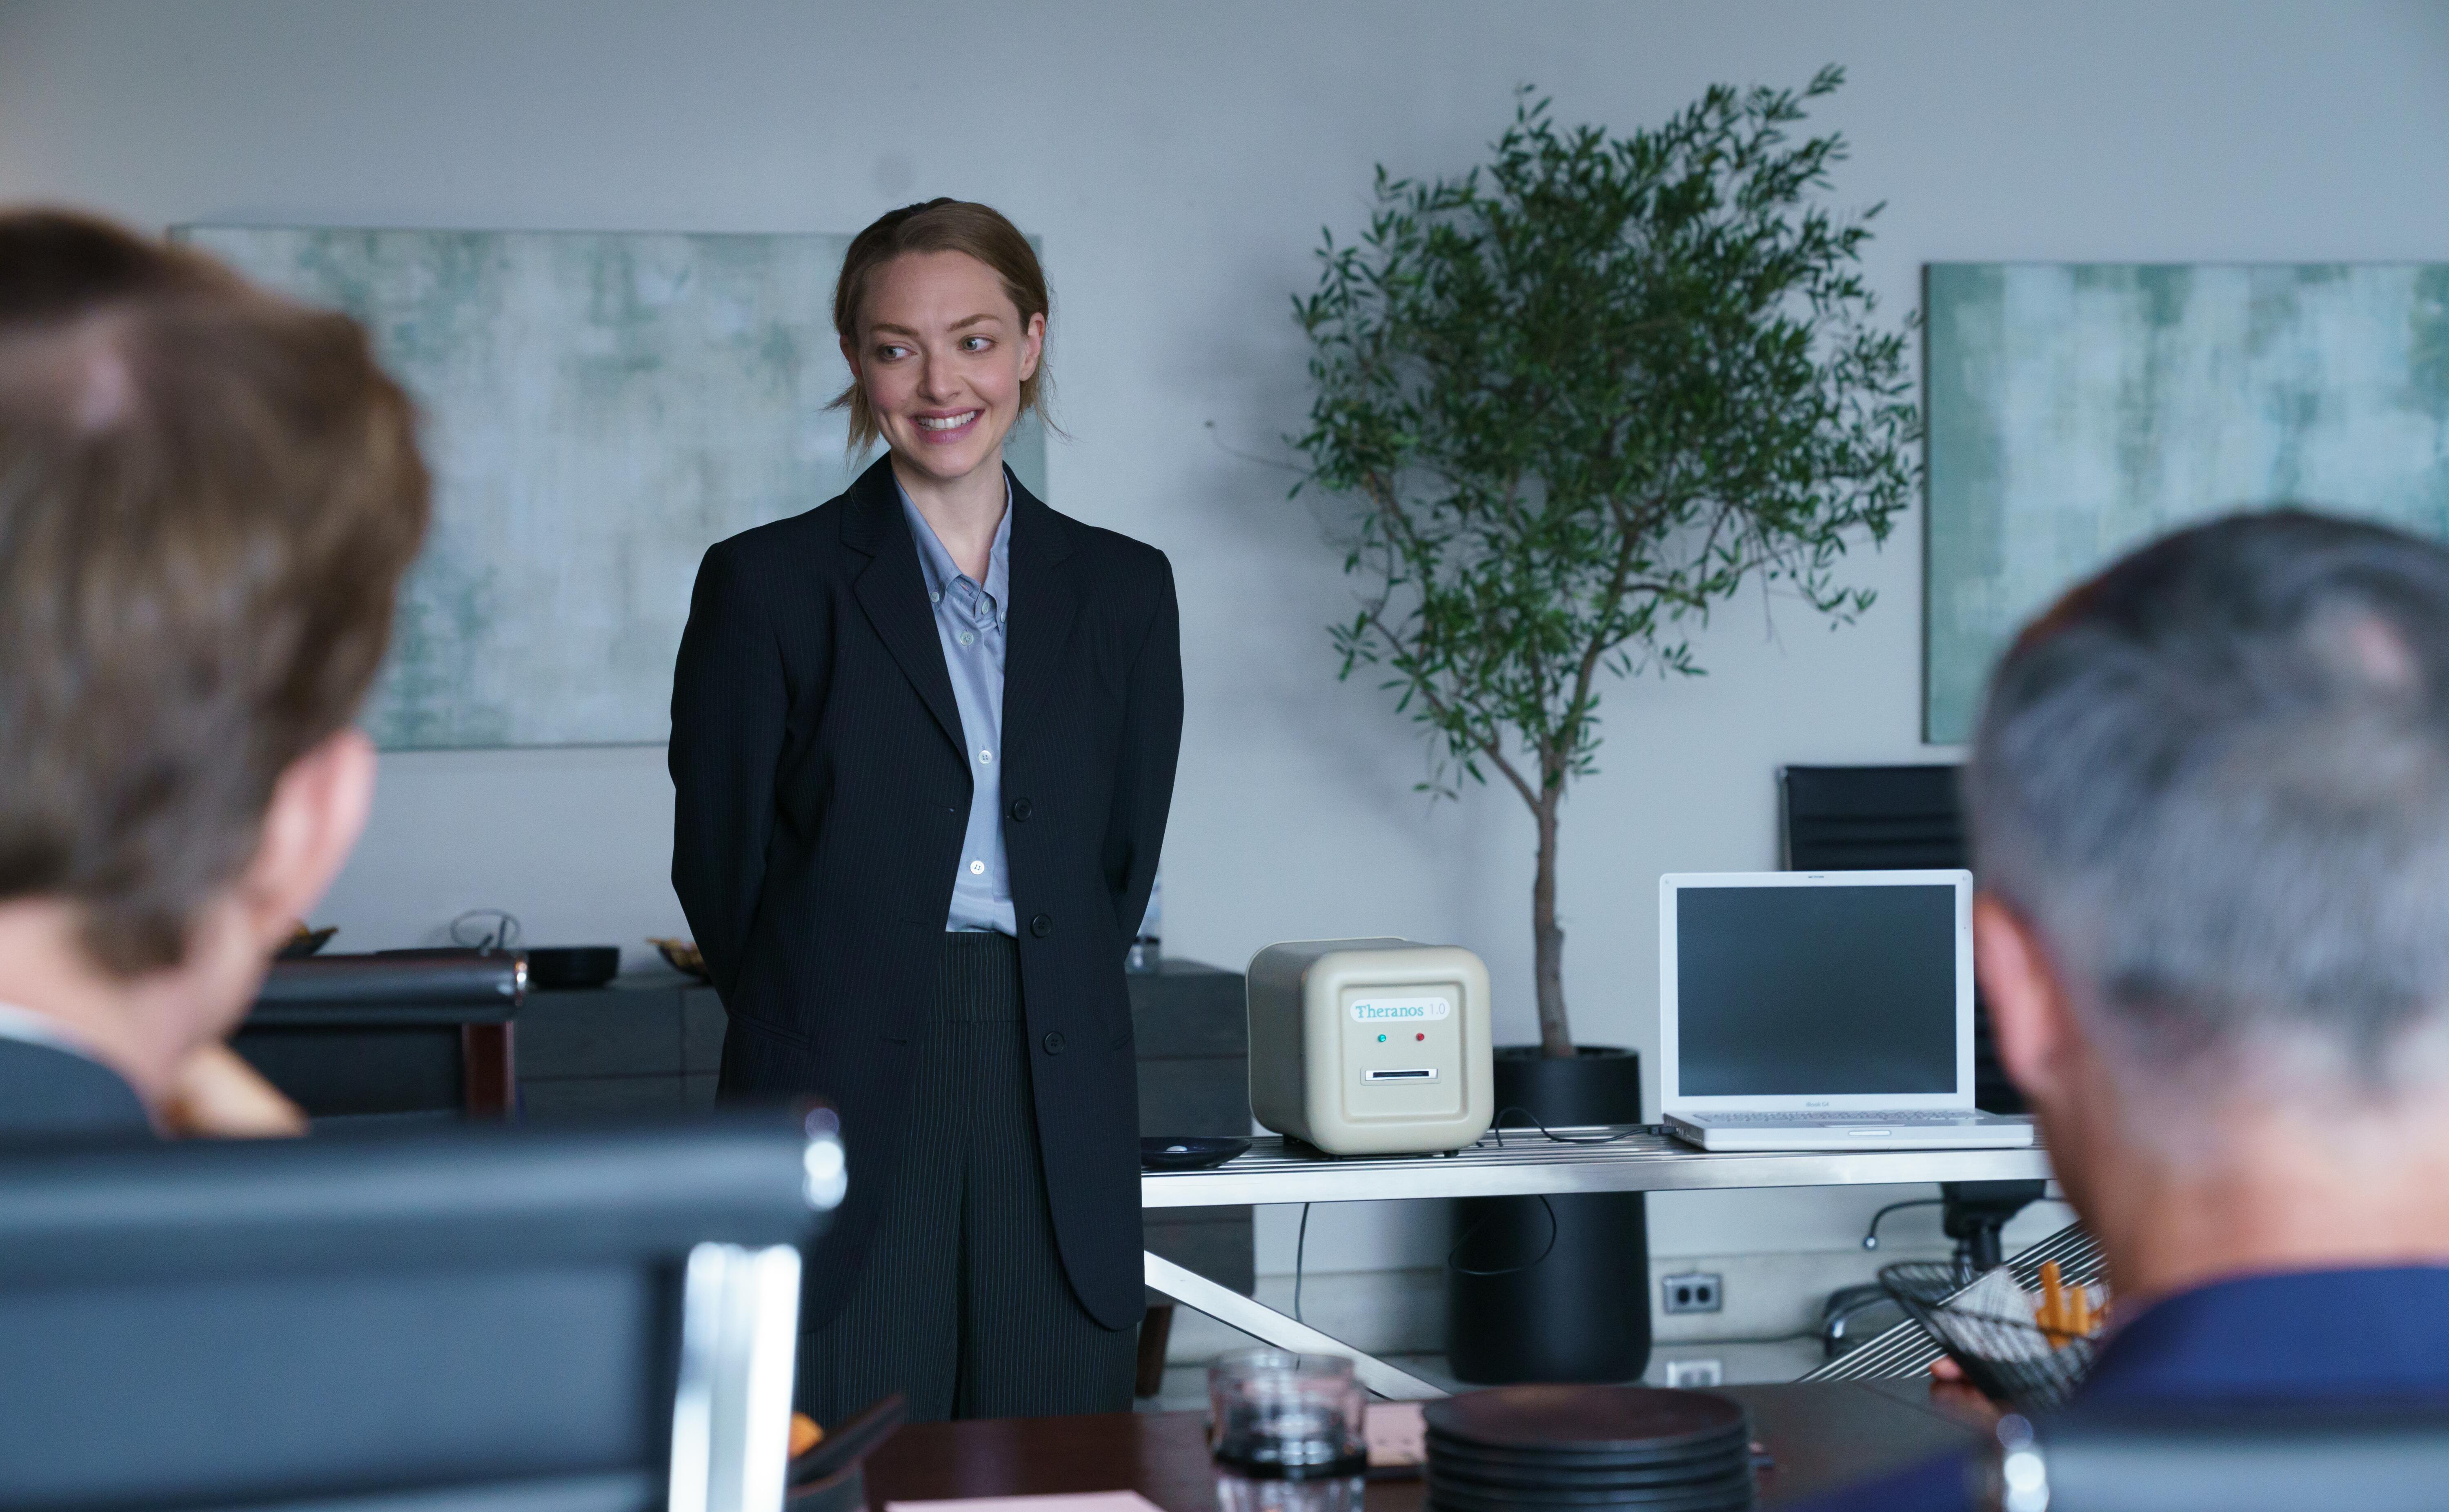 Amanda Seyfried as Elizabeth Holmes in Episode 2 of 'The Dropout.'